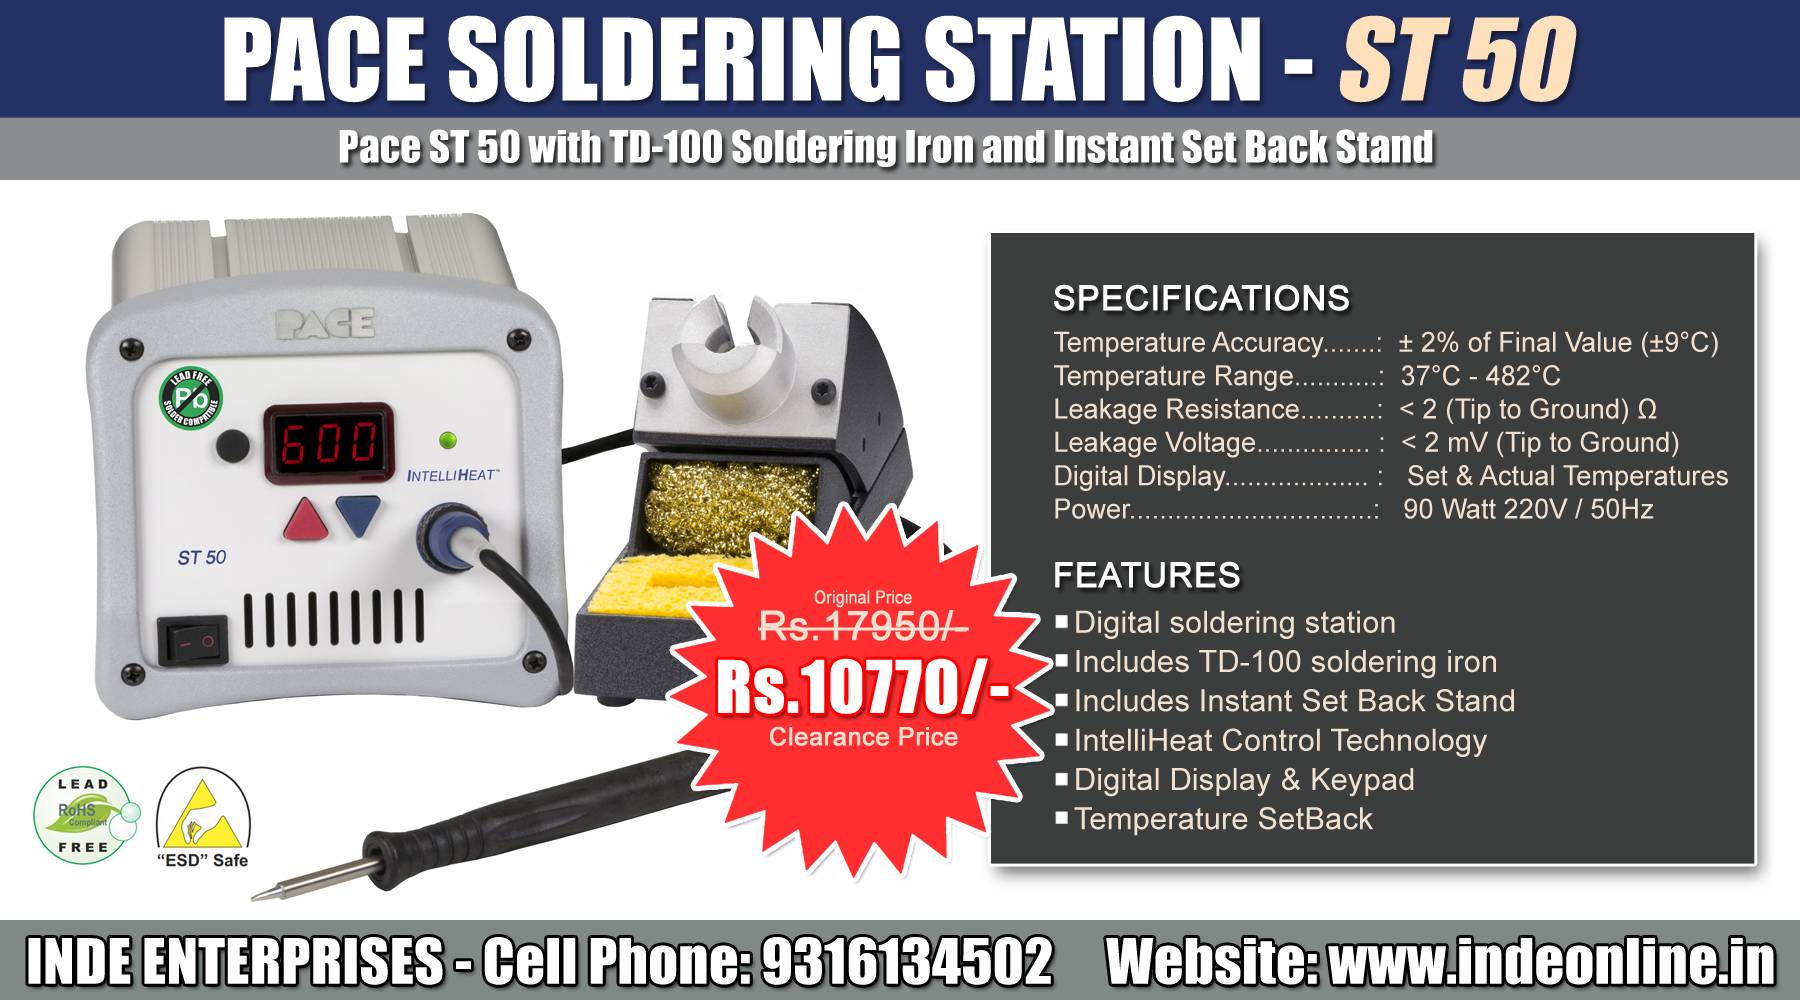 PACE Soldering Station ST50 Price Rs.10,770/-